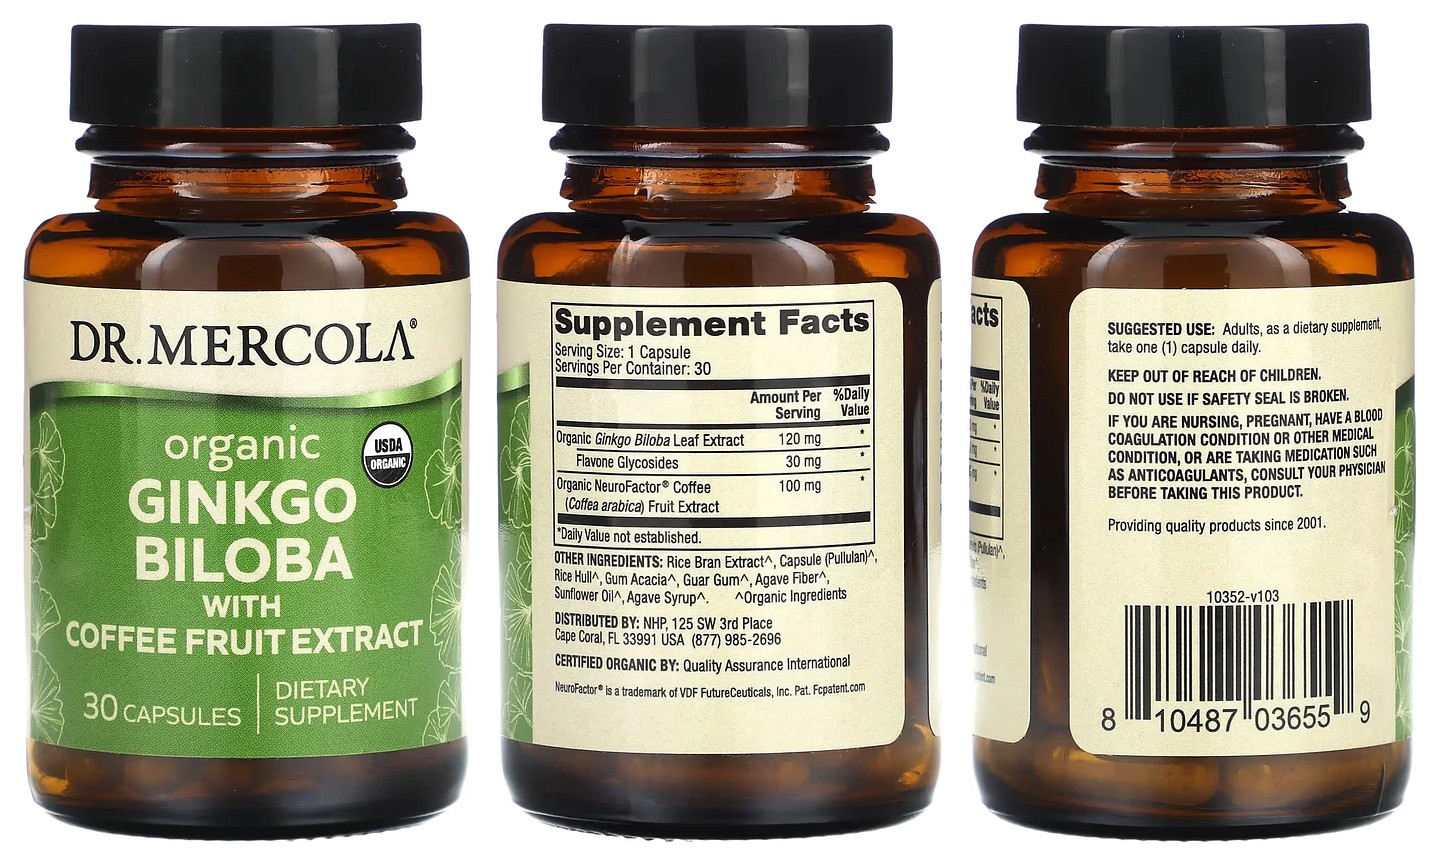 Dr. Mercola, Organic Ginkgo Biloba with Coffee Fruit Extract packaging